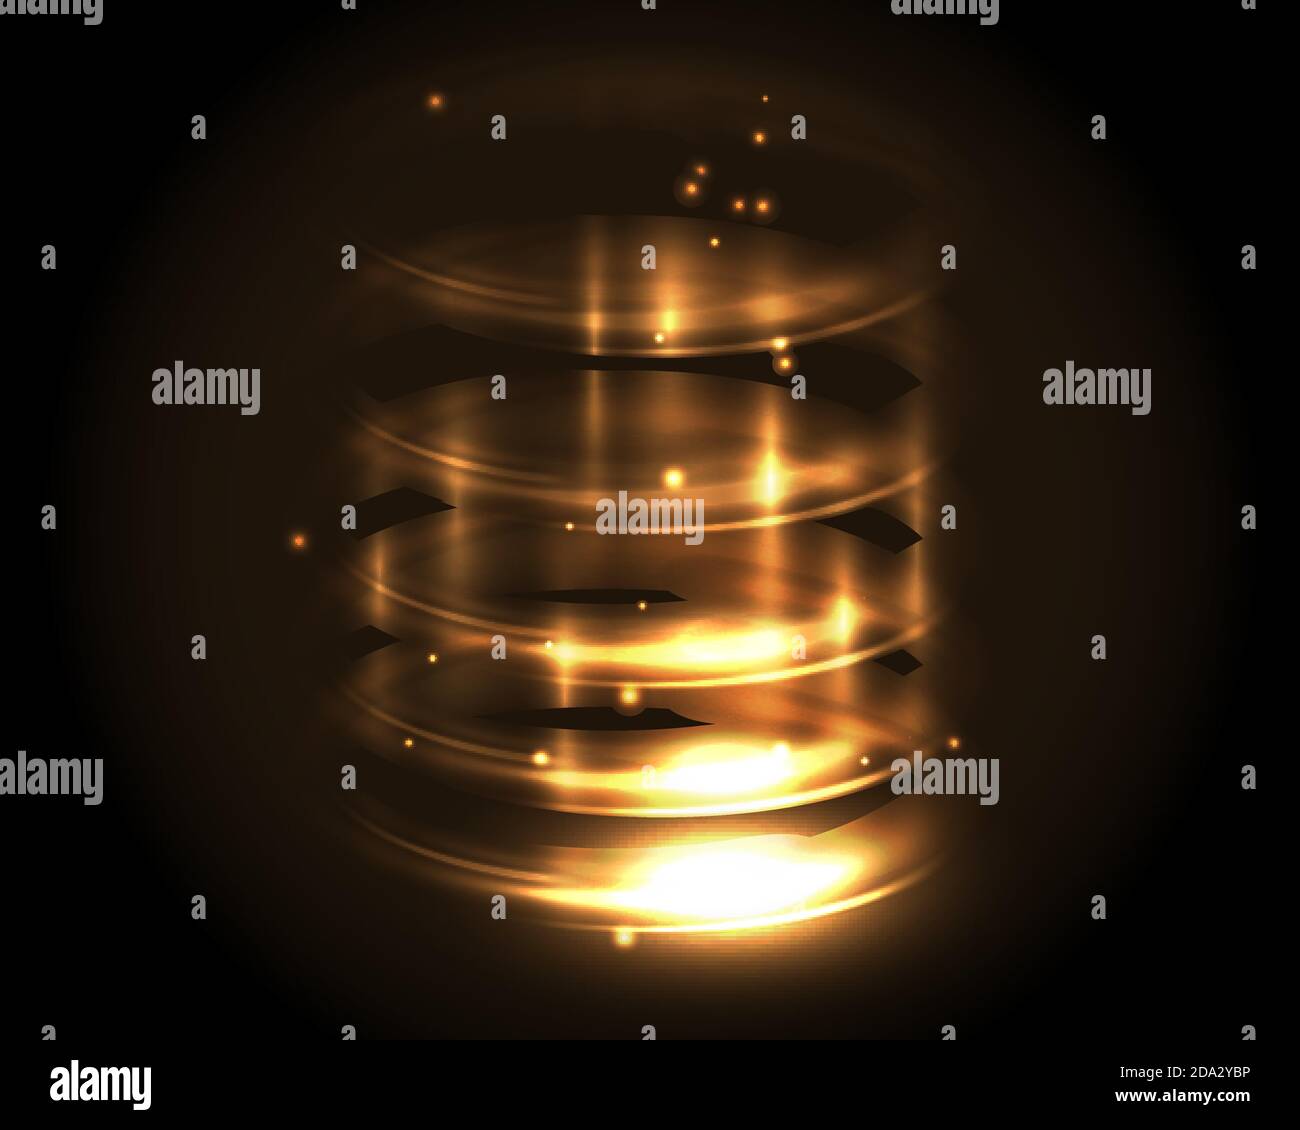 Light magic orb Stock Vector Images - Alamy